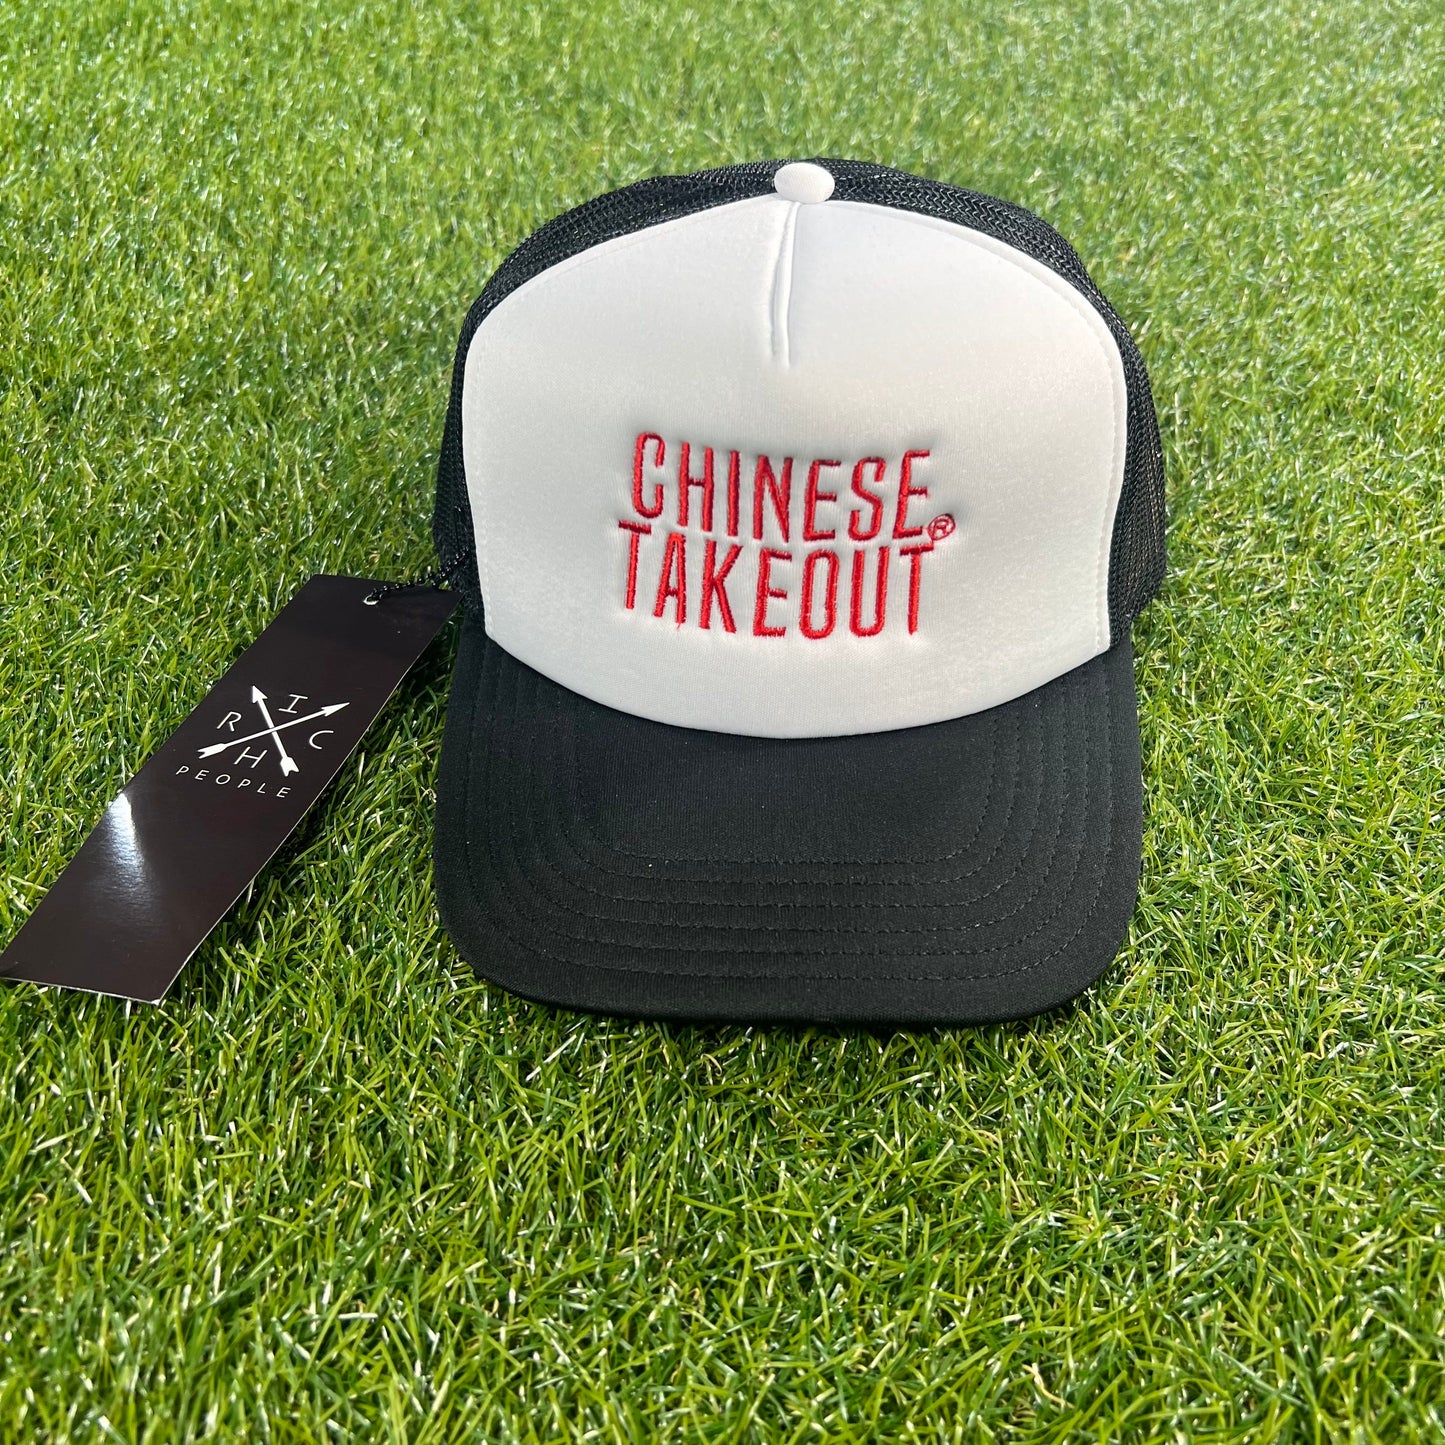  Hats, Red Hats, Trucker, Style, Snapback, Men, Boys, Teens, Gifts, Hat, Nix Smith Co, Urban, Wmns, Girls,  Hat, Black and Red Hat, Fitted Hats, Fashion, Chinese Takeout